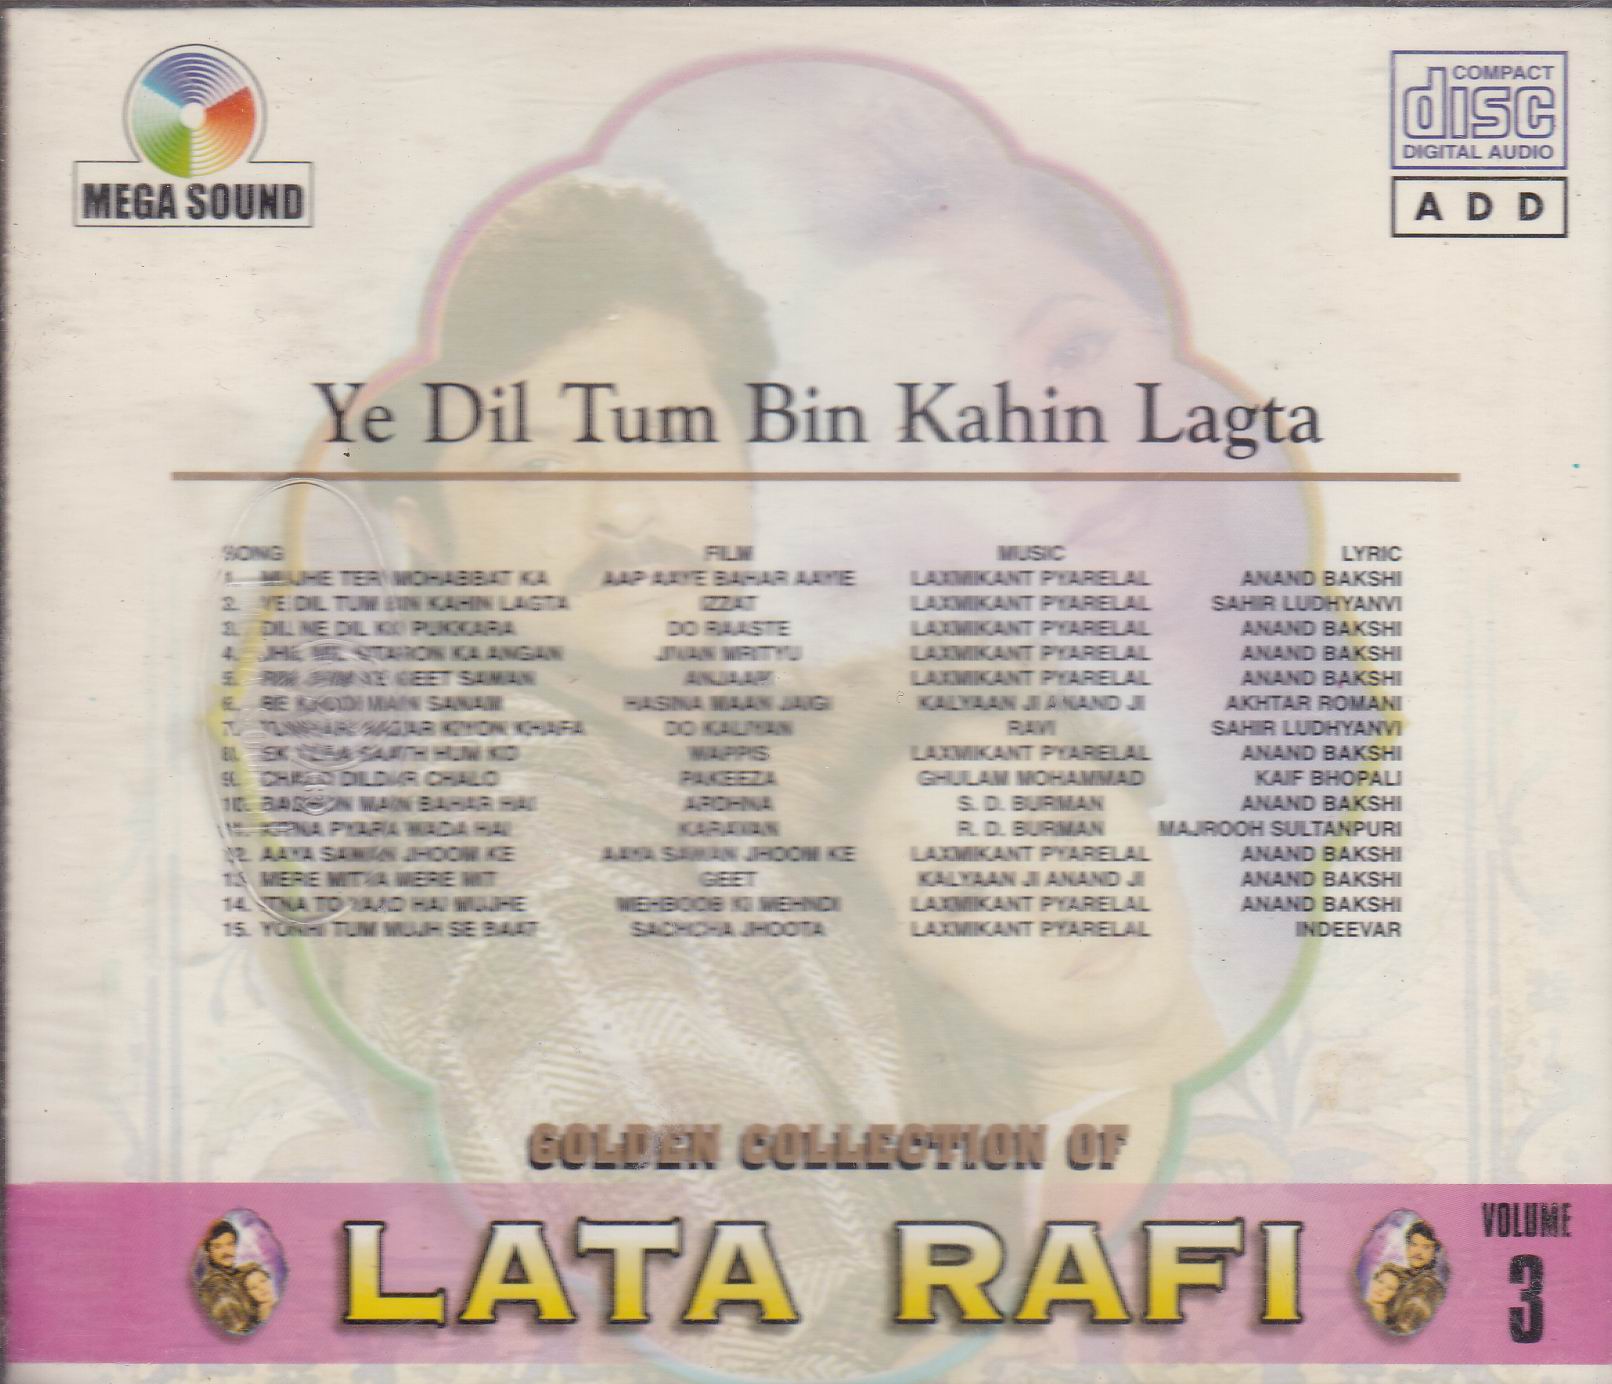 Golden Collection Of Lata Rafi Vol 3 MS CD Superb Recording - Click Image to Close